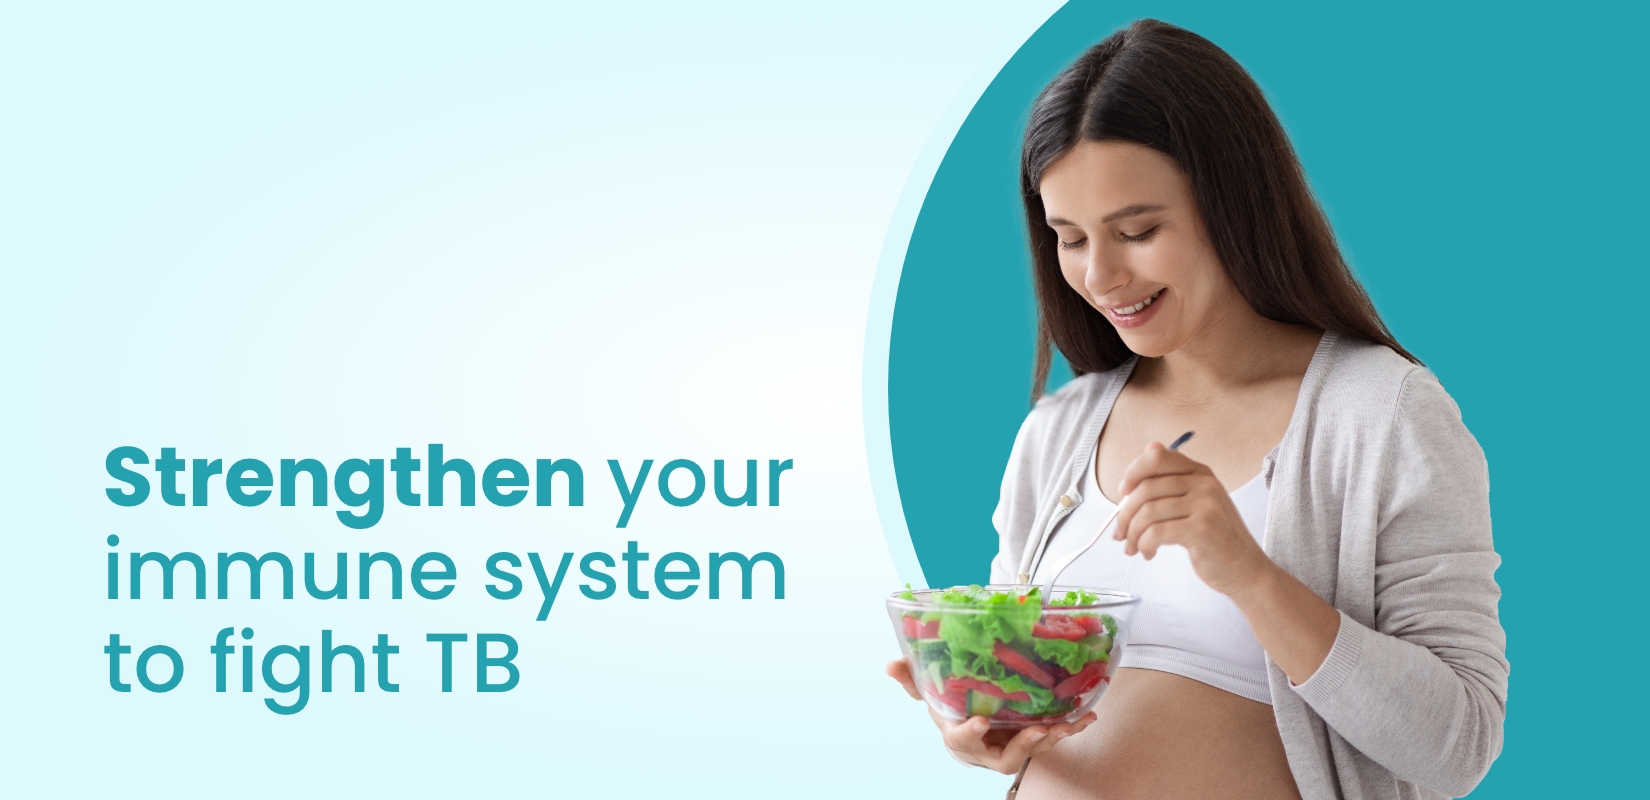 Strengthen your immune system to fight TB